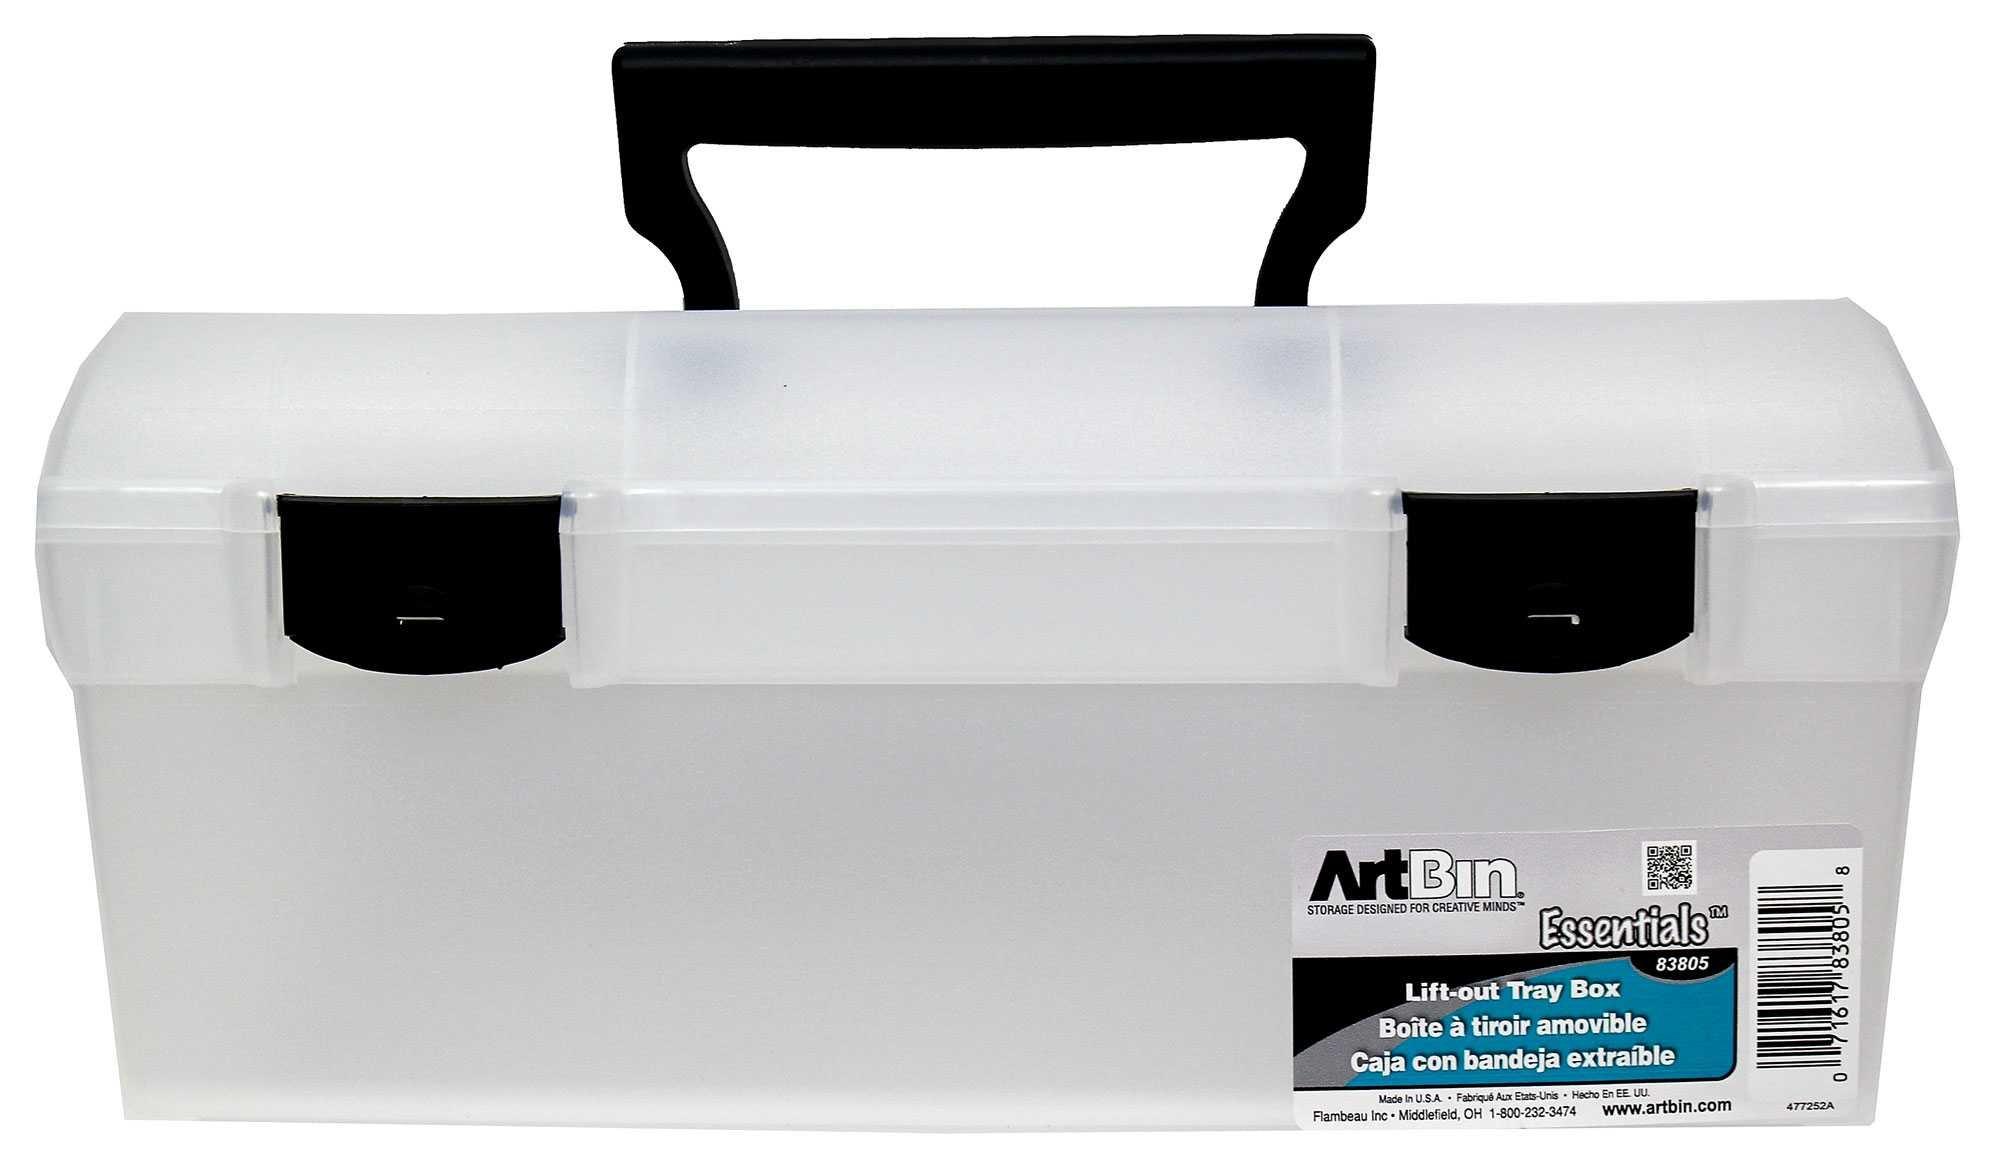 ArtBin Essentials Artbox with Lift Out Tray